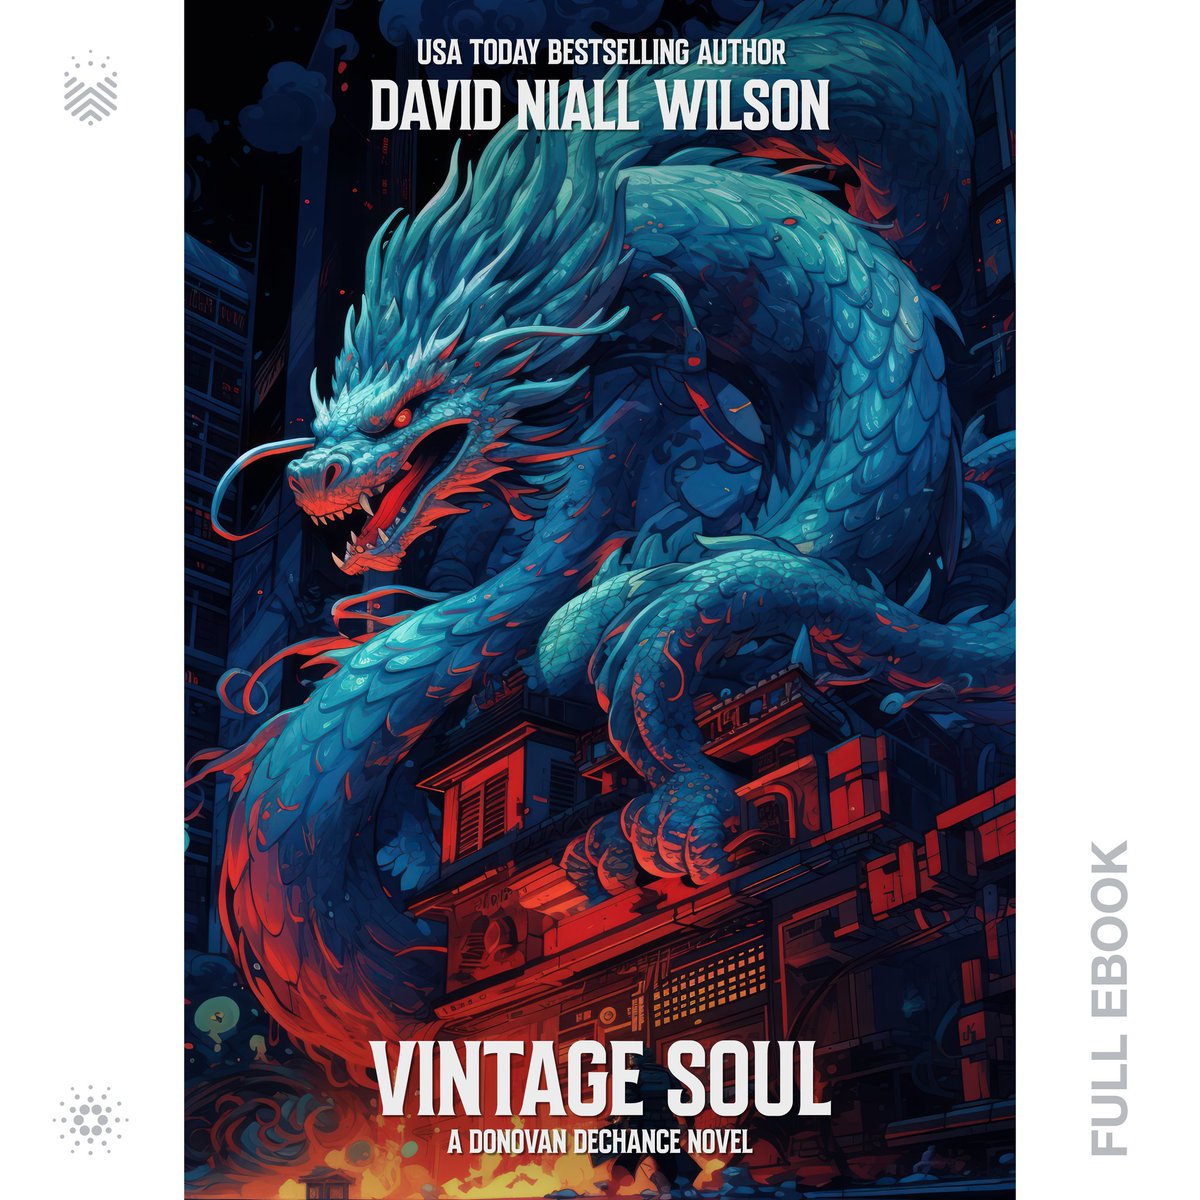 Super pumped to have won Vintage Souls #085 in the $BOOKtober Giveaway!!! Thanks @book_io!!